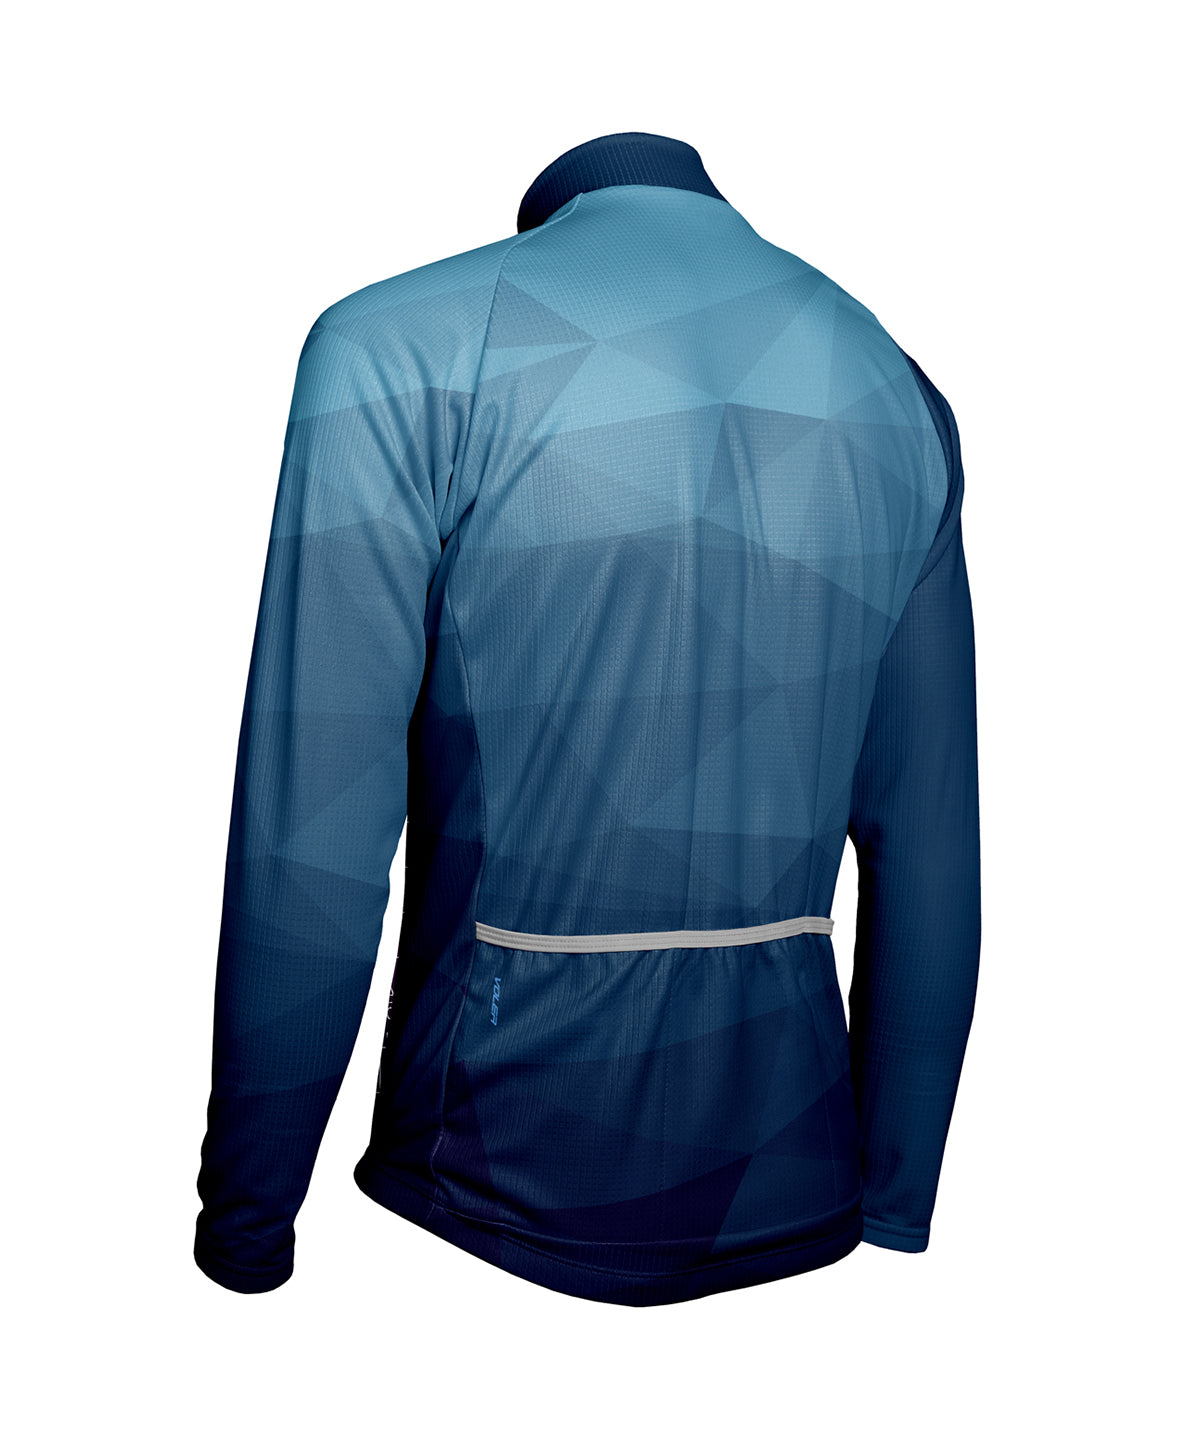 M. PELOTON THERMAL JERSEY - KELLY CATALE '24